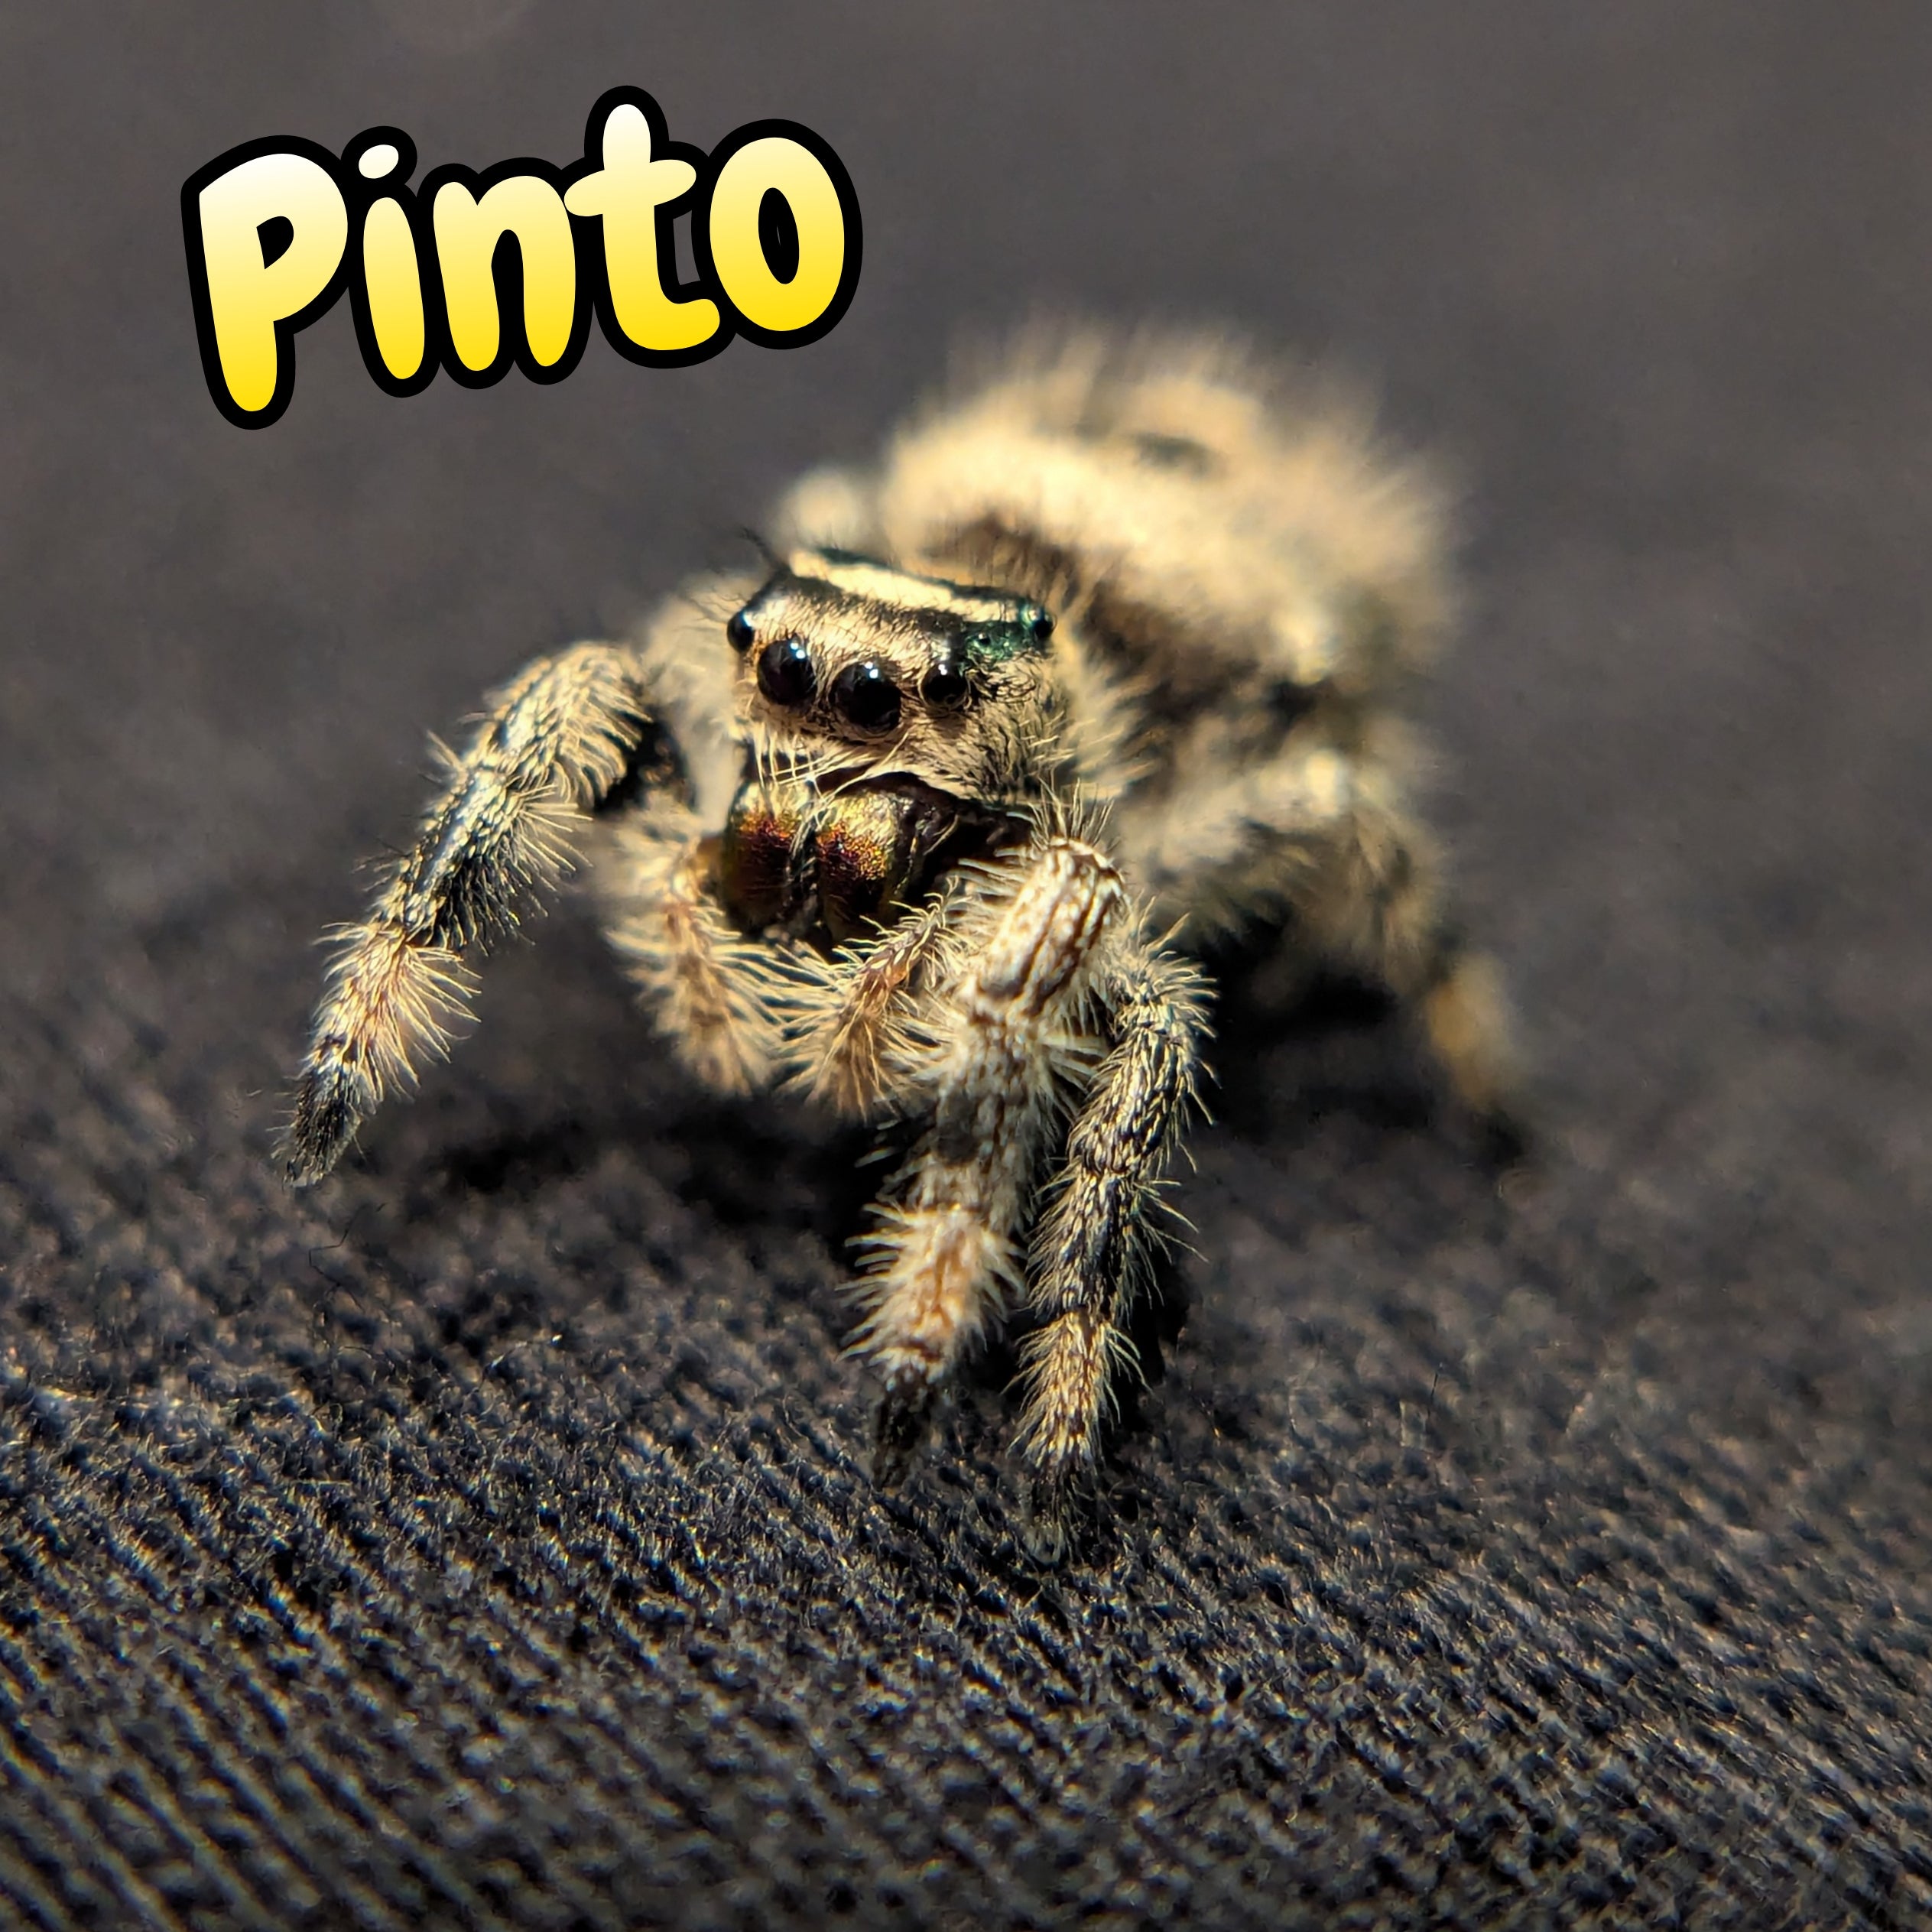 Regal Jumping Spider "Pinto"